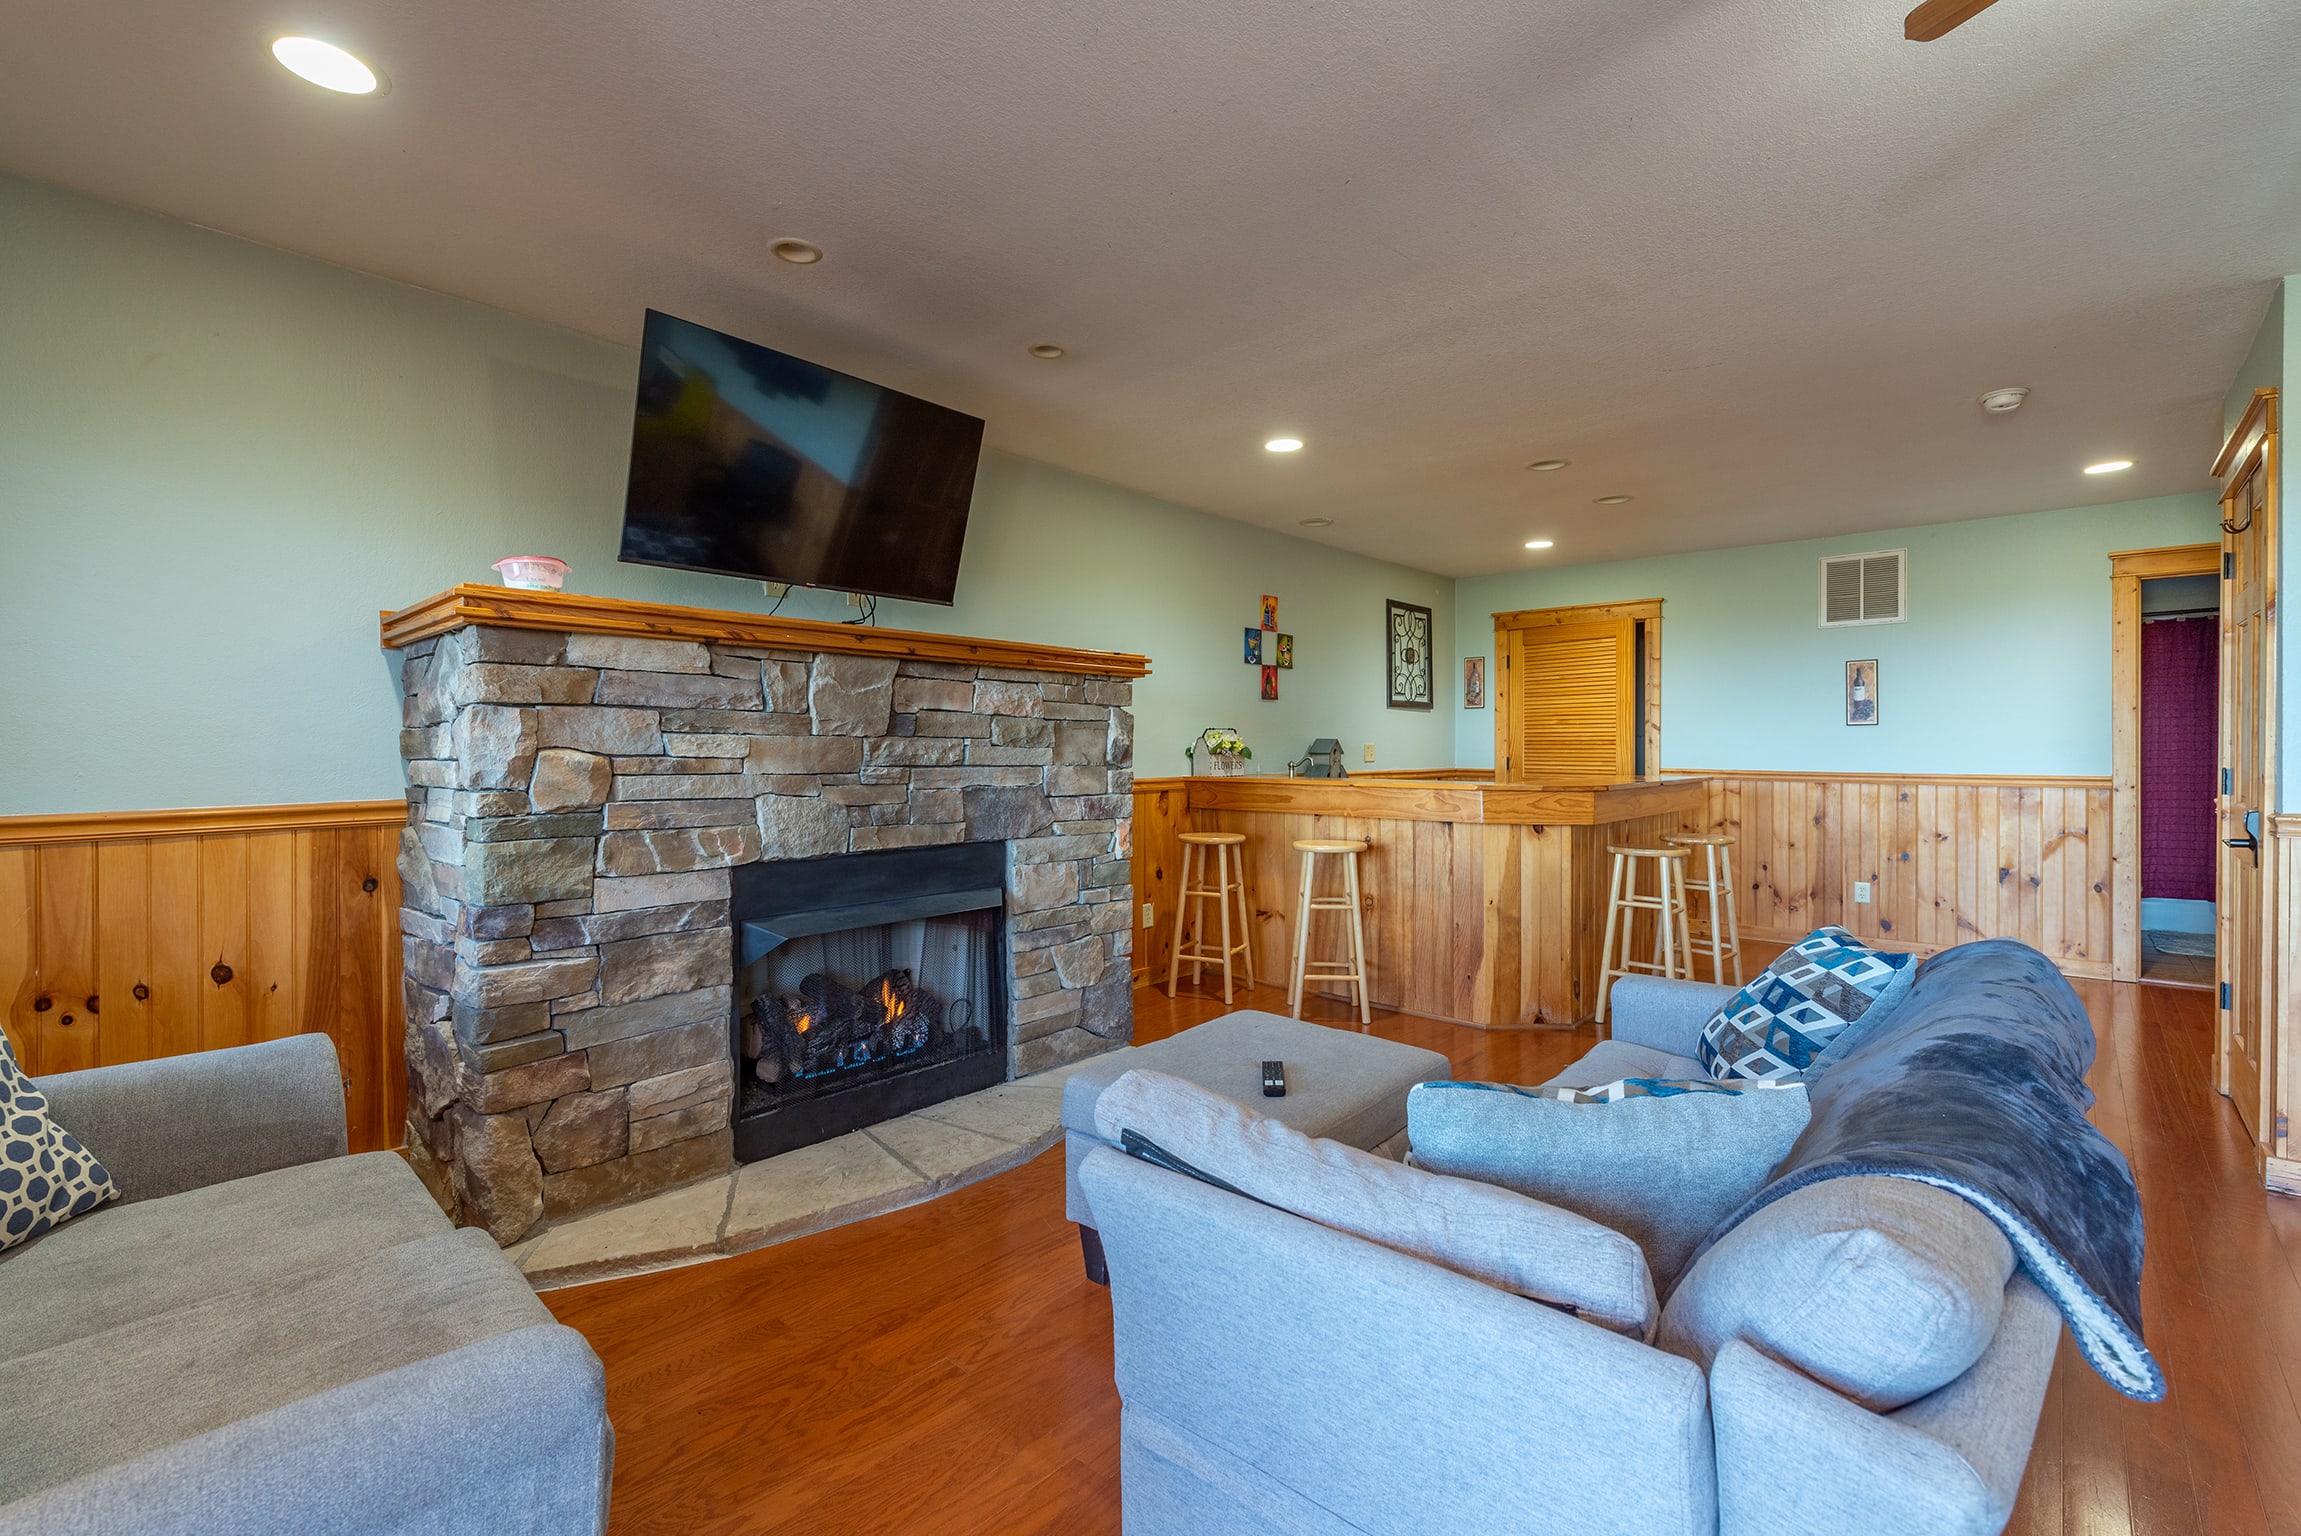 Enjoy a movie and fire after a fun mountain day!